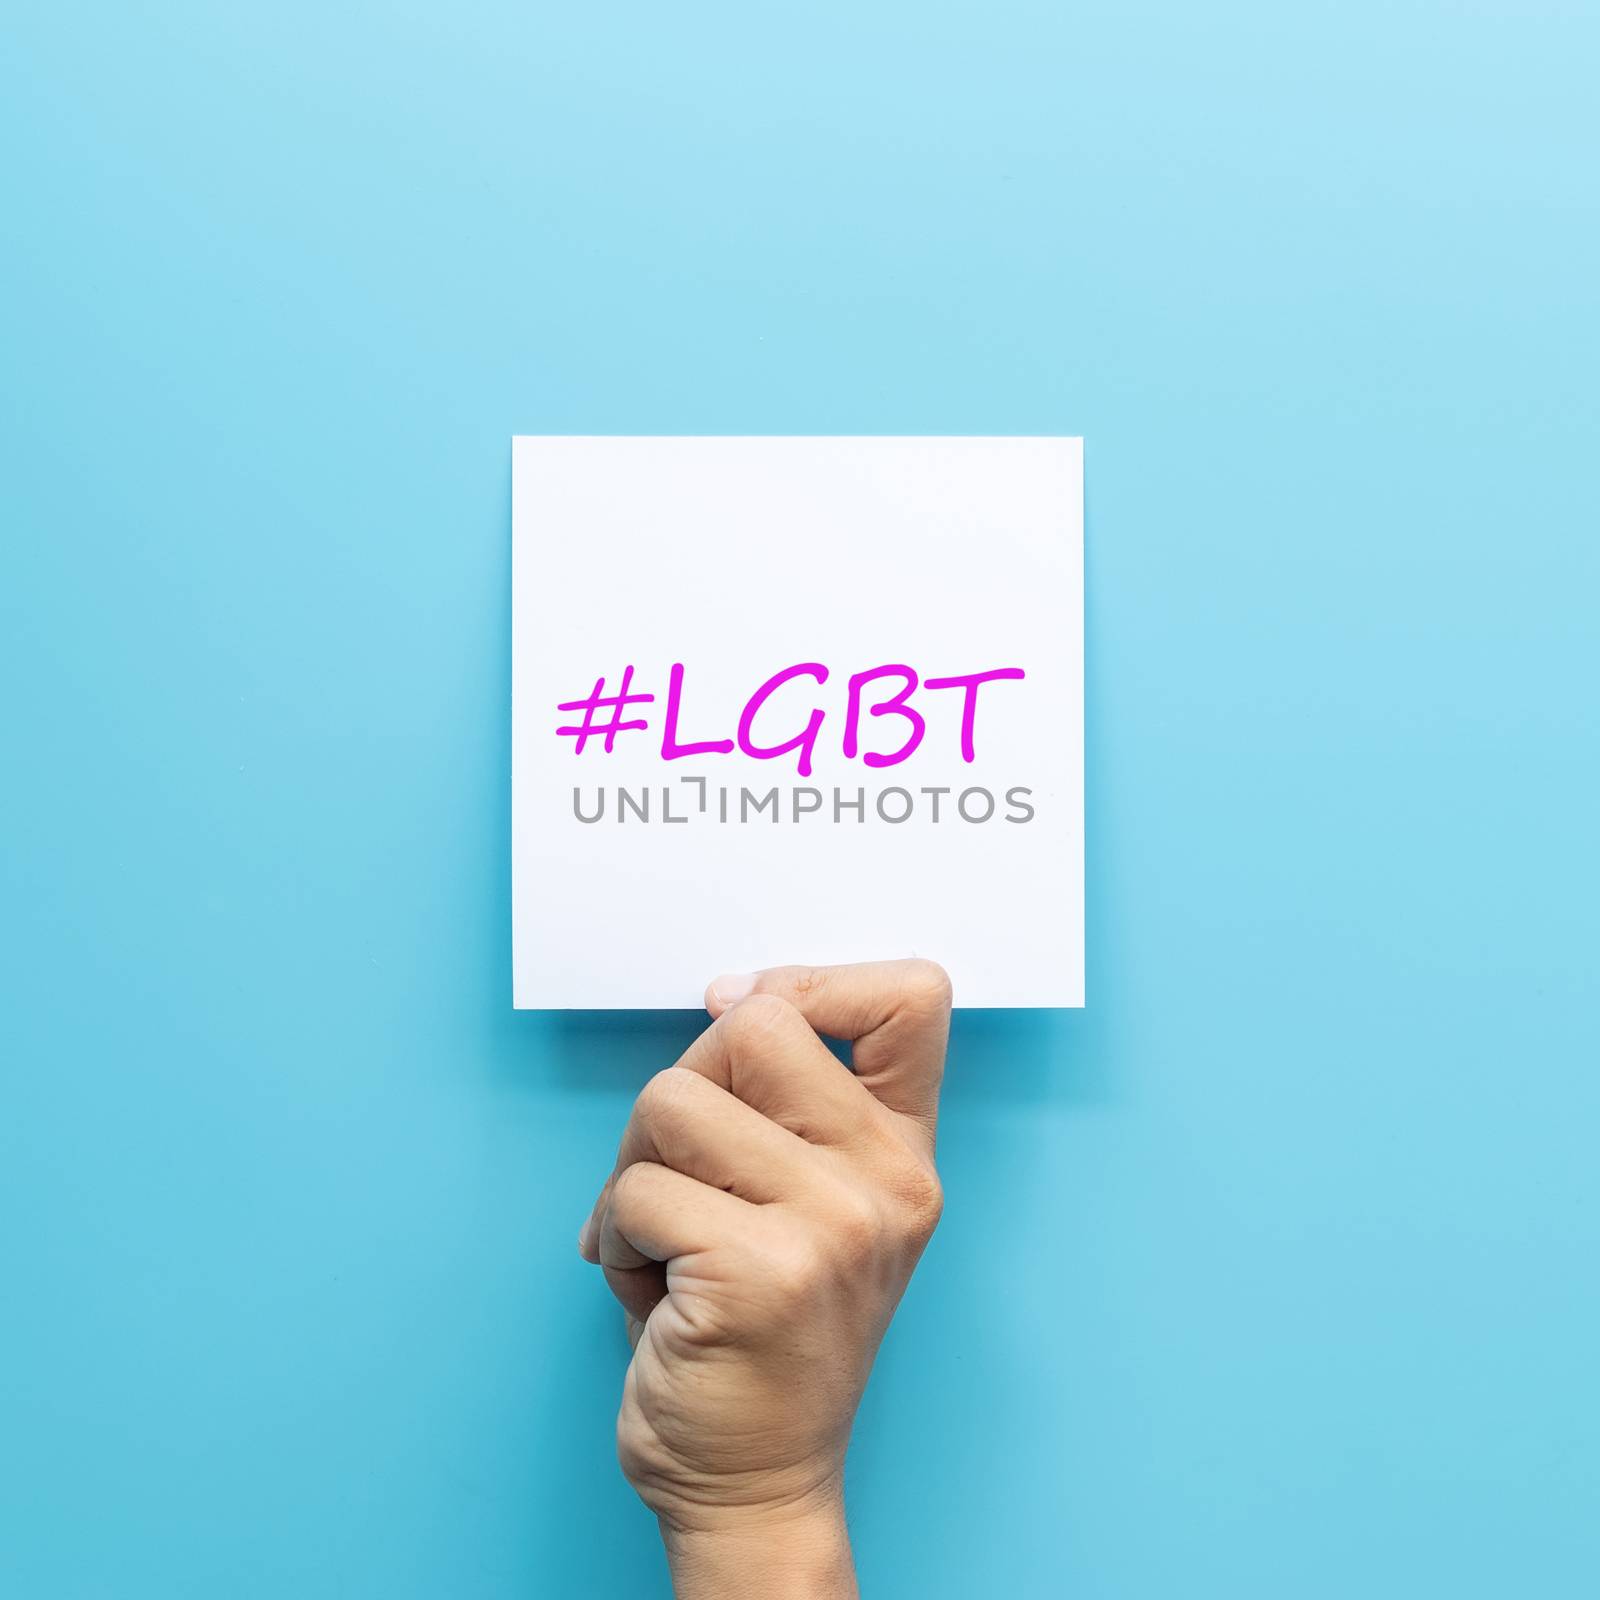 hashtag #LGBT on white paper in hand isolated on blue background by asiandelight